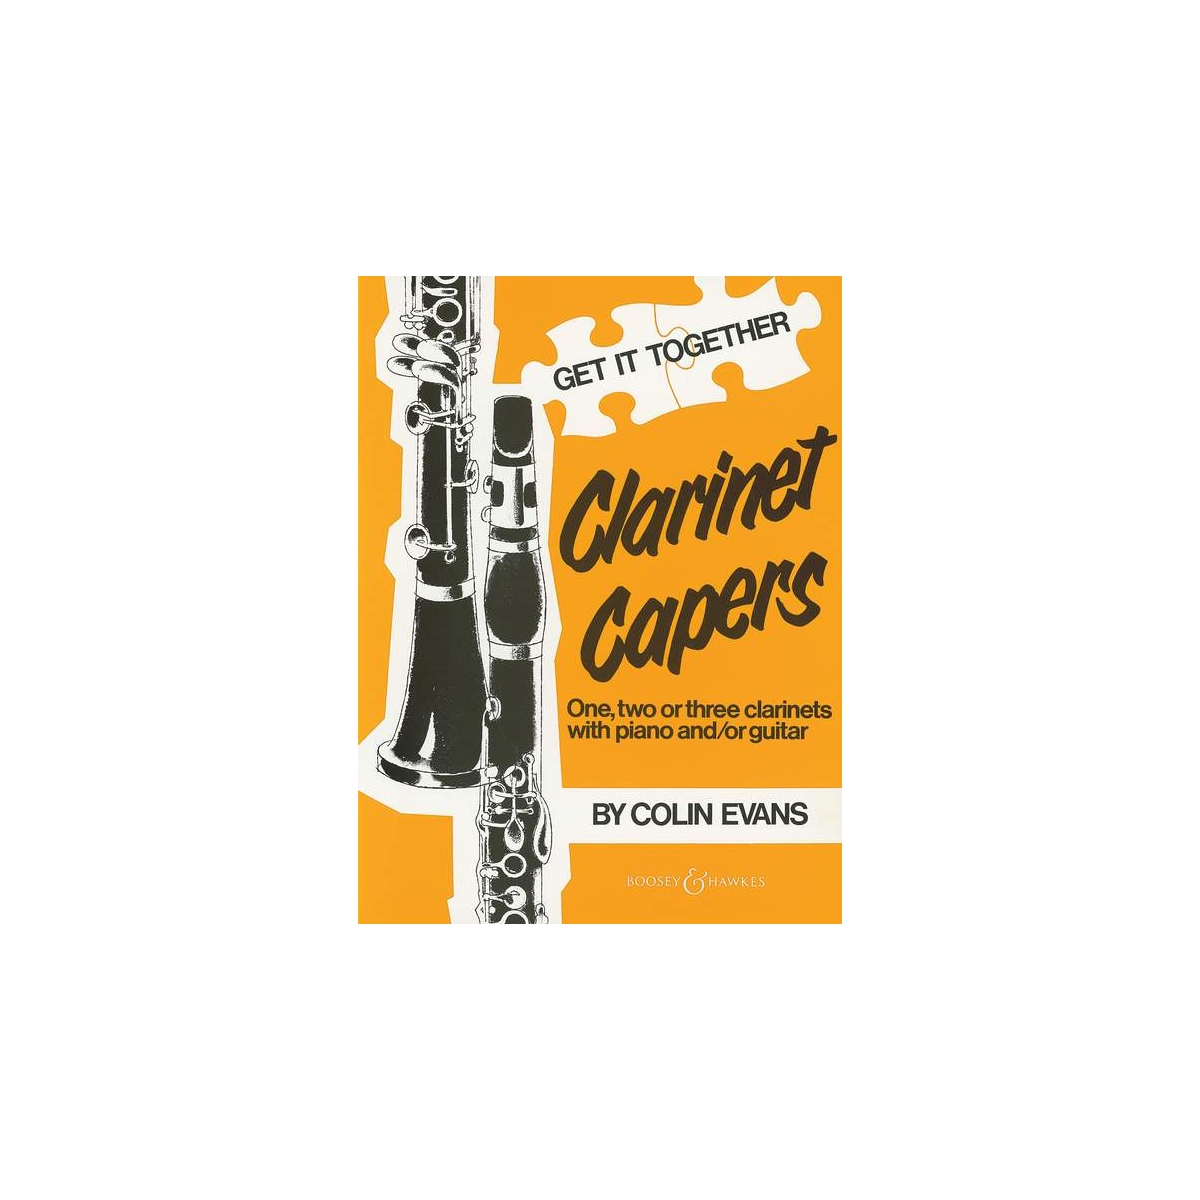 Clarinet Capers